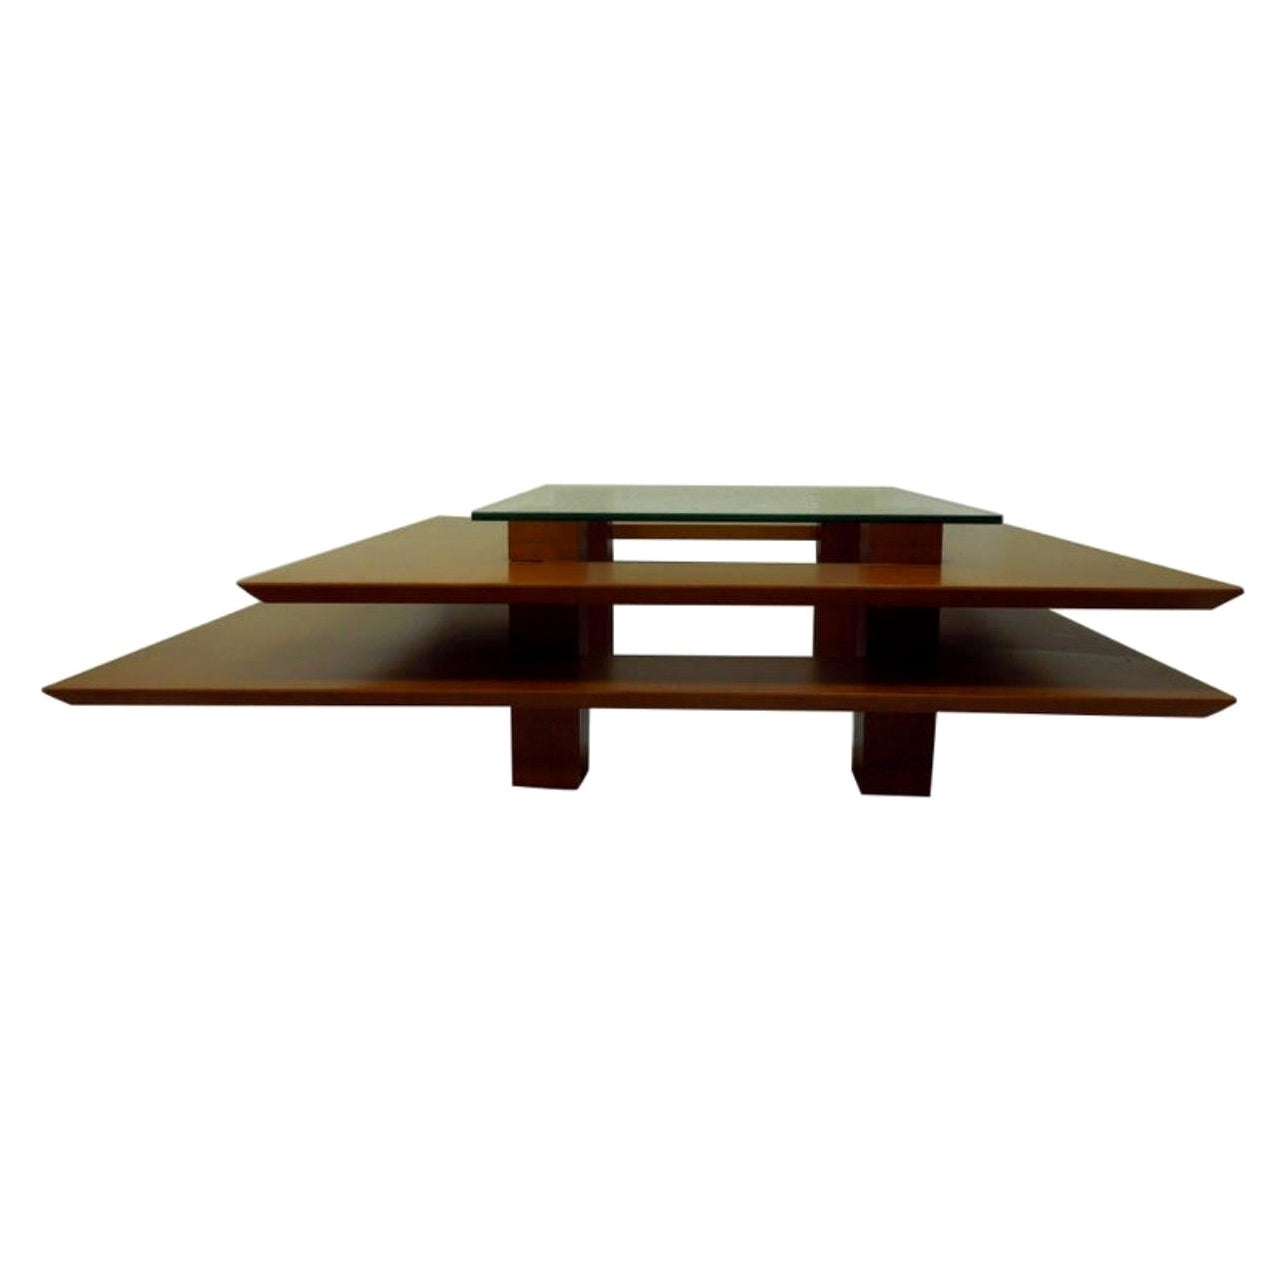 Clemmer Heidsieck Three-Tier 1990s French Modern Coffee Table